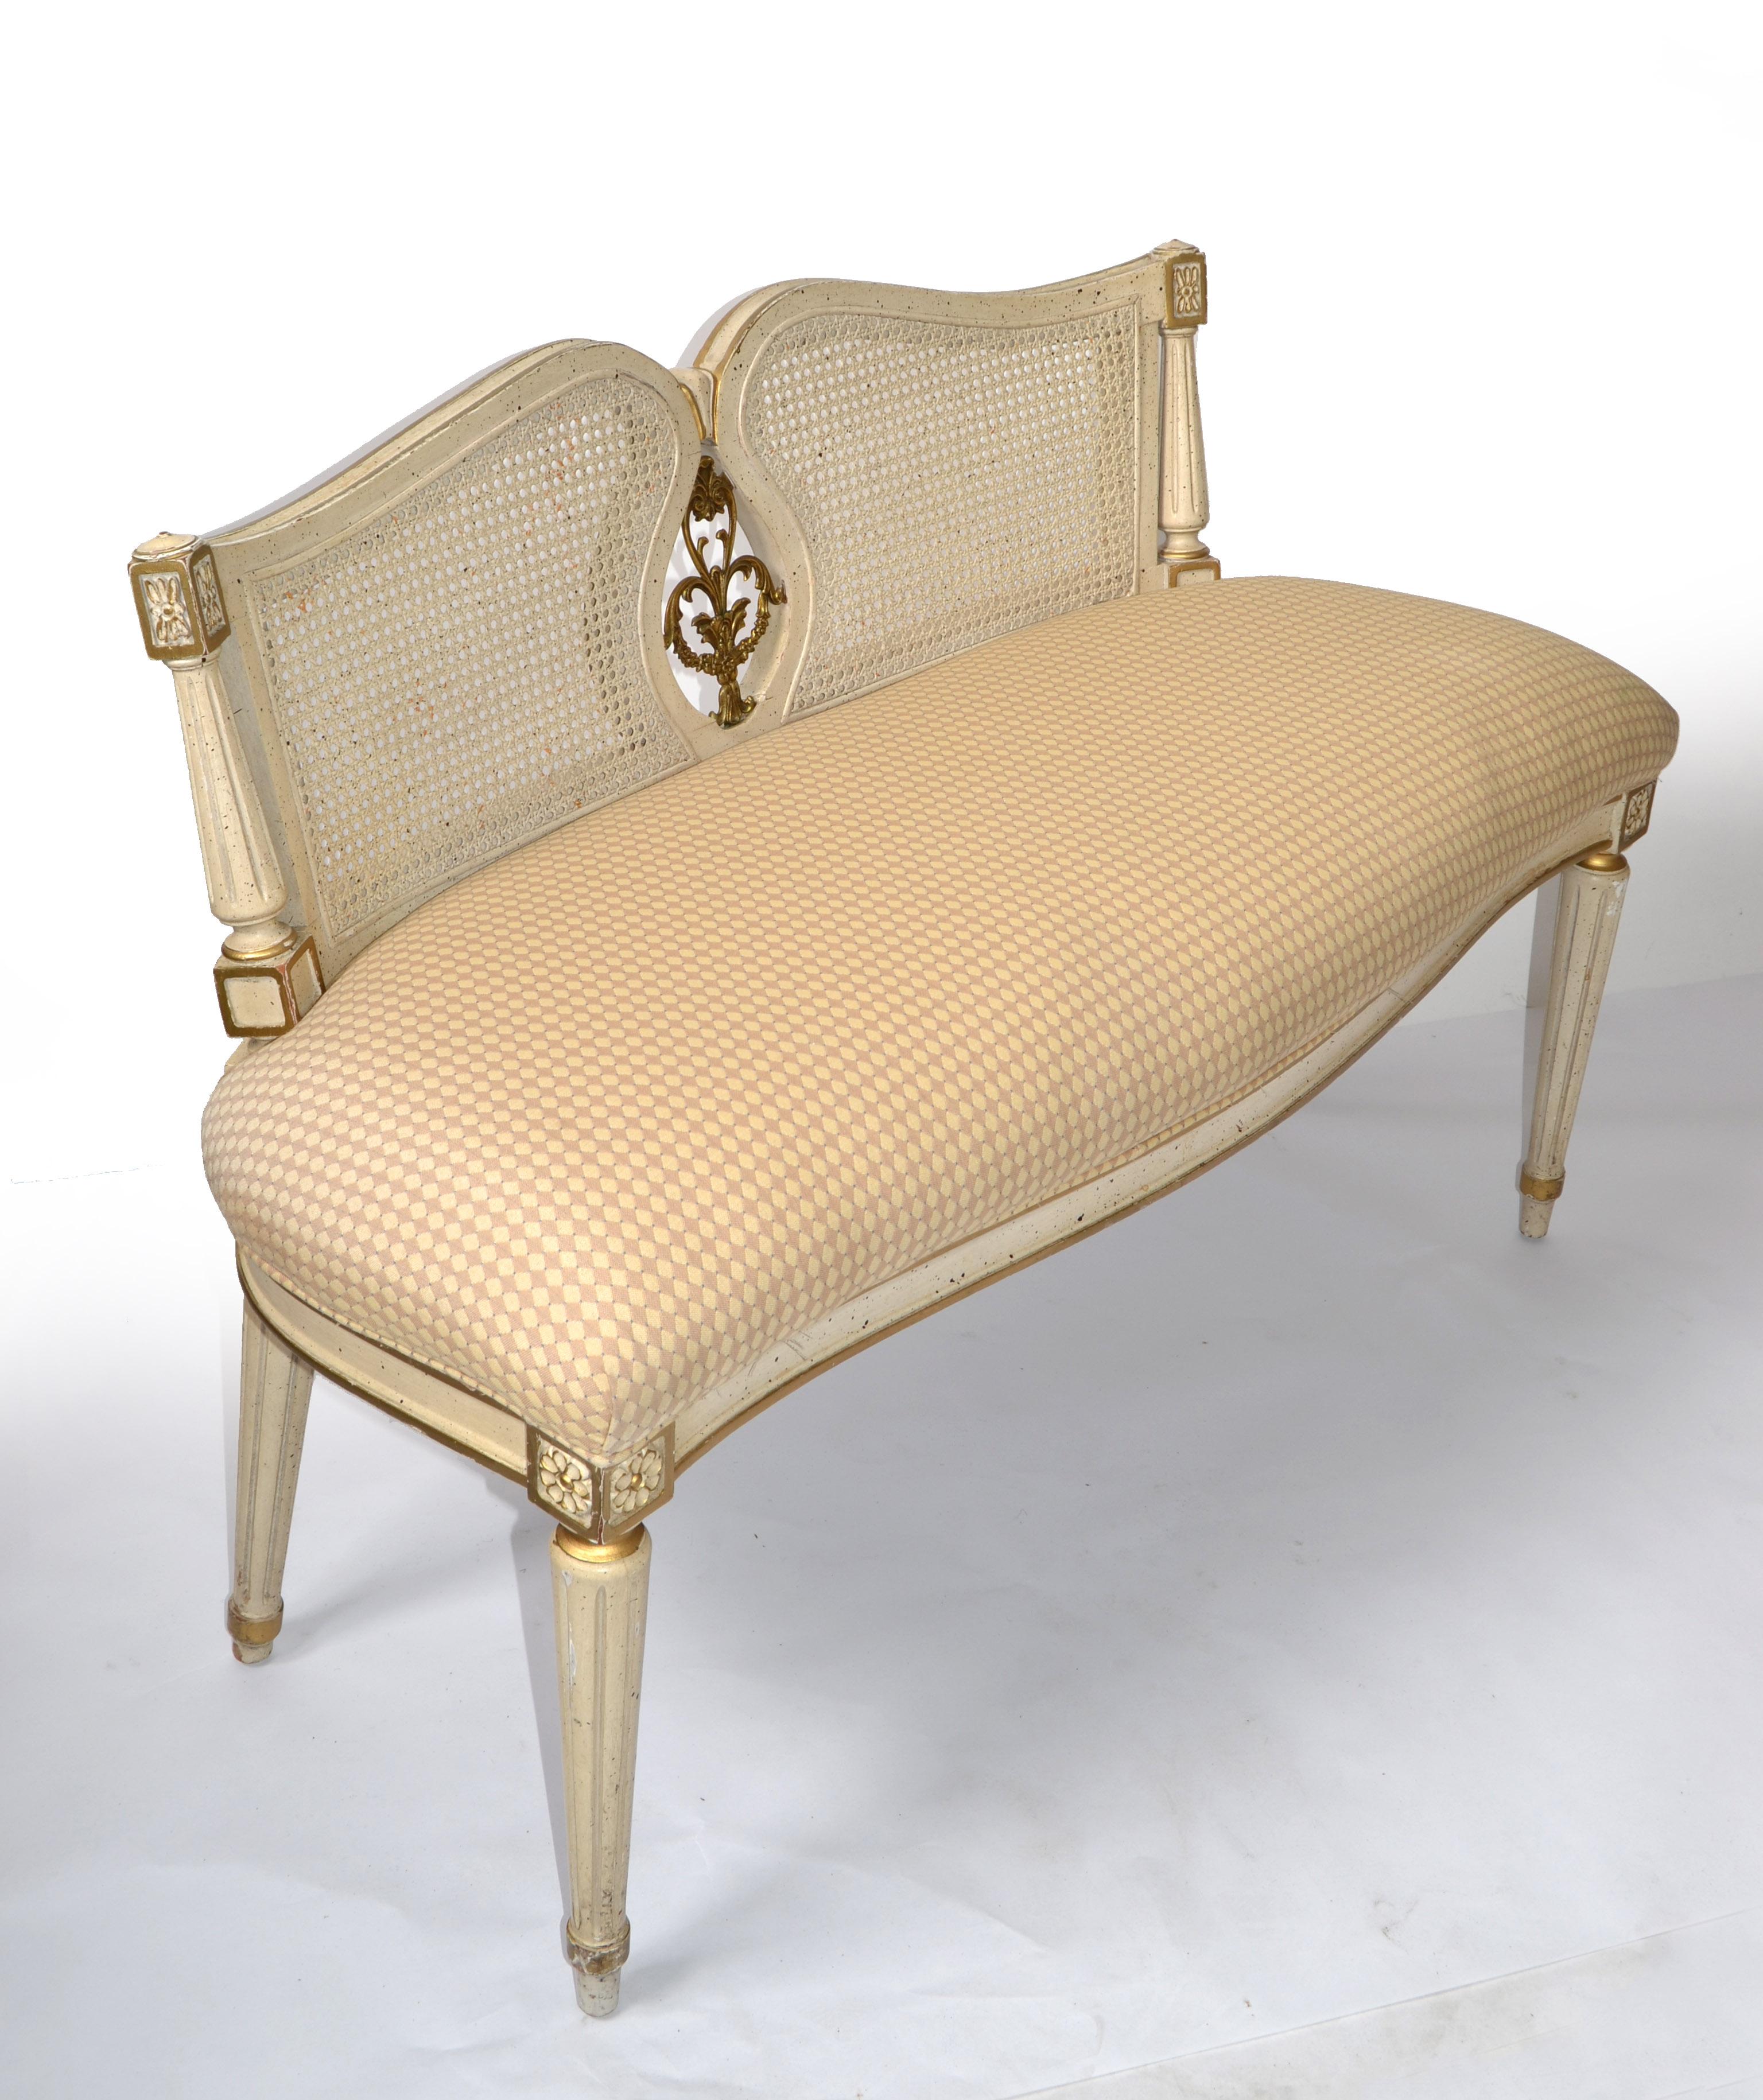 Exquisite Louis XVI Bench gilt hand carved hardwood, handwoven Cane Backrest and Taupe color Cotton Fabric Upholstery, made in USA. 
The tapered legs on this graceful French style bench are all hand carved. It is standard with a boxed pullover